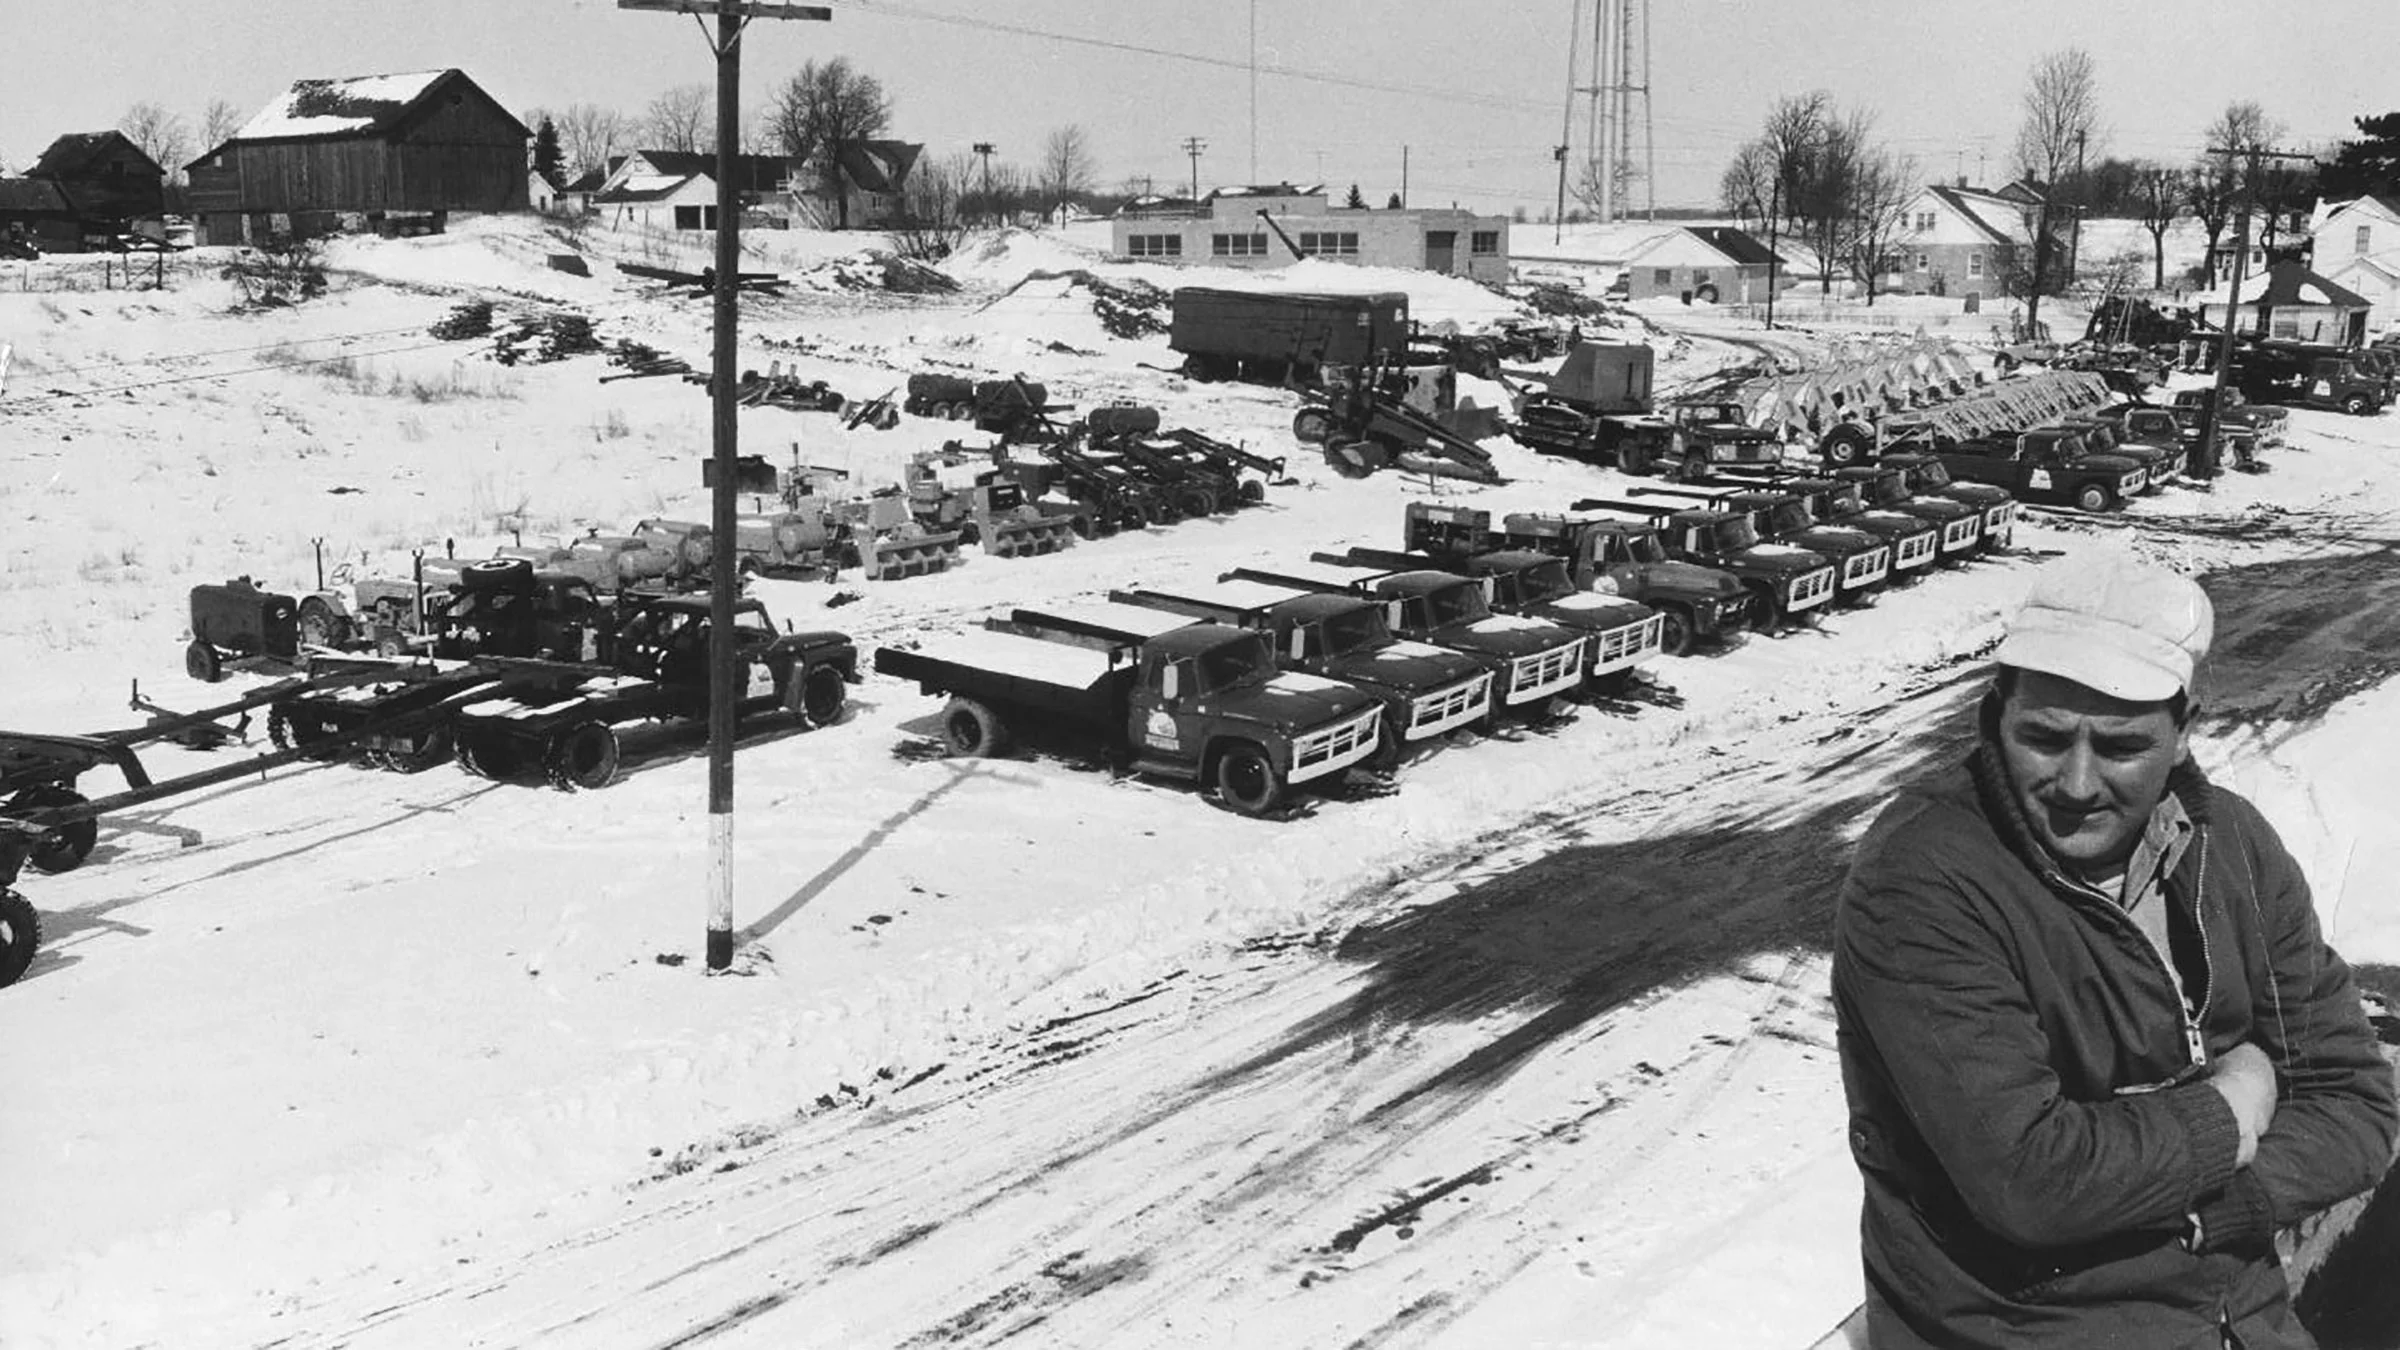 Dale Michels stands with Michels trucks in the background in an archival photo